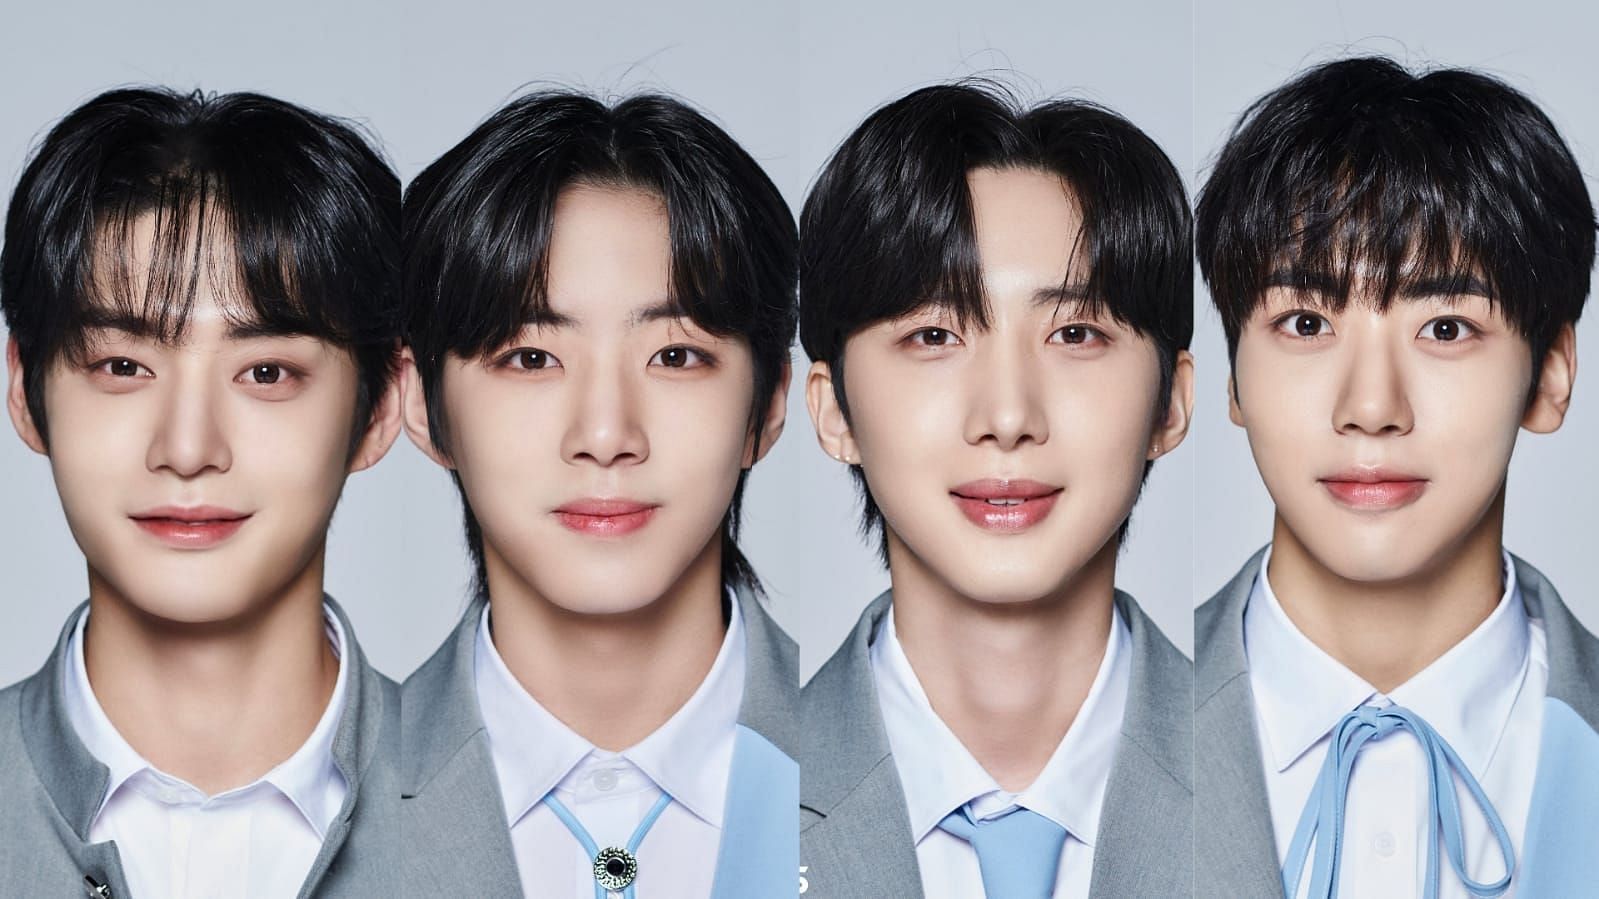 Meet the known faces of Mnet